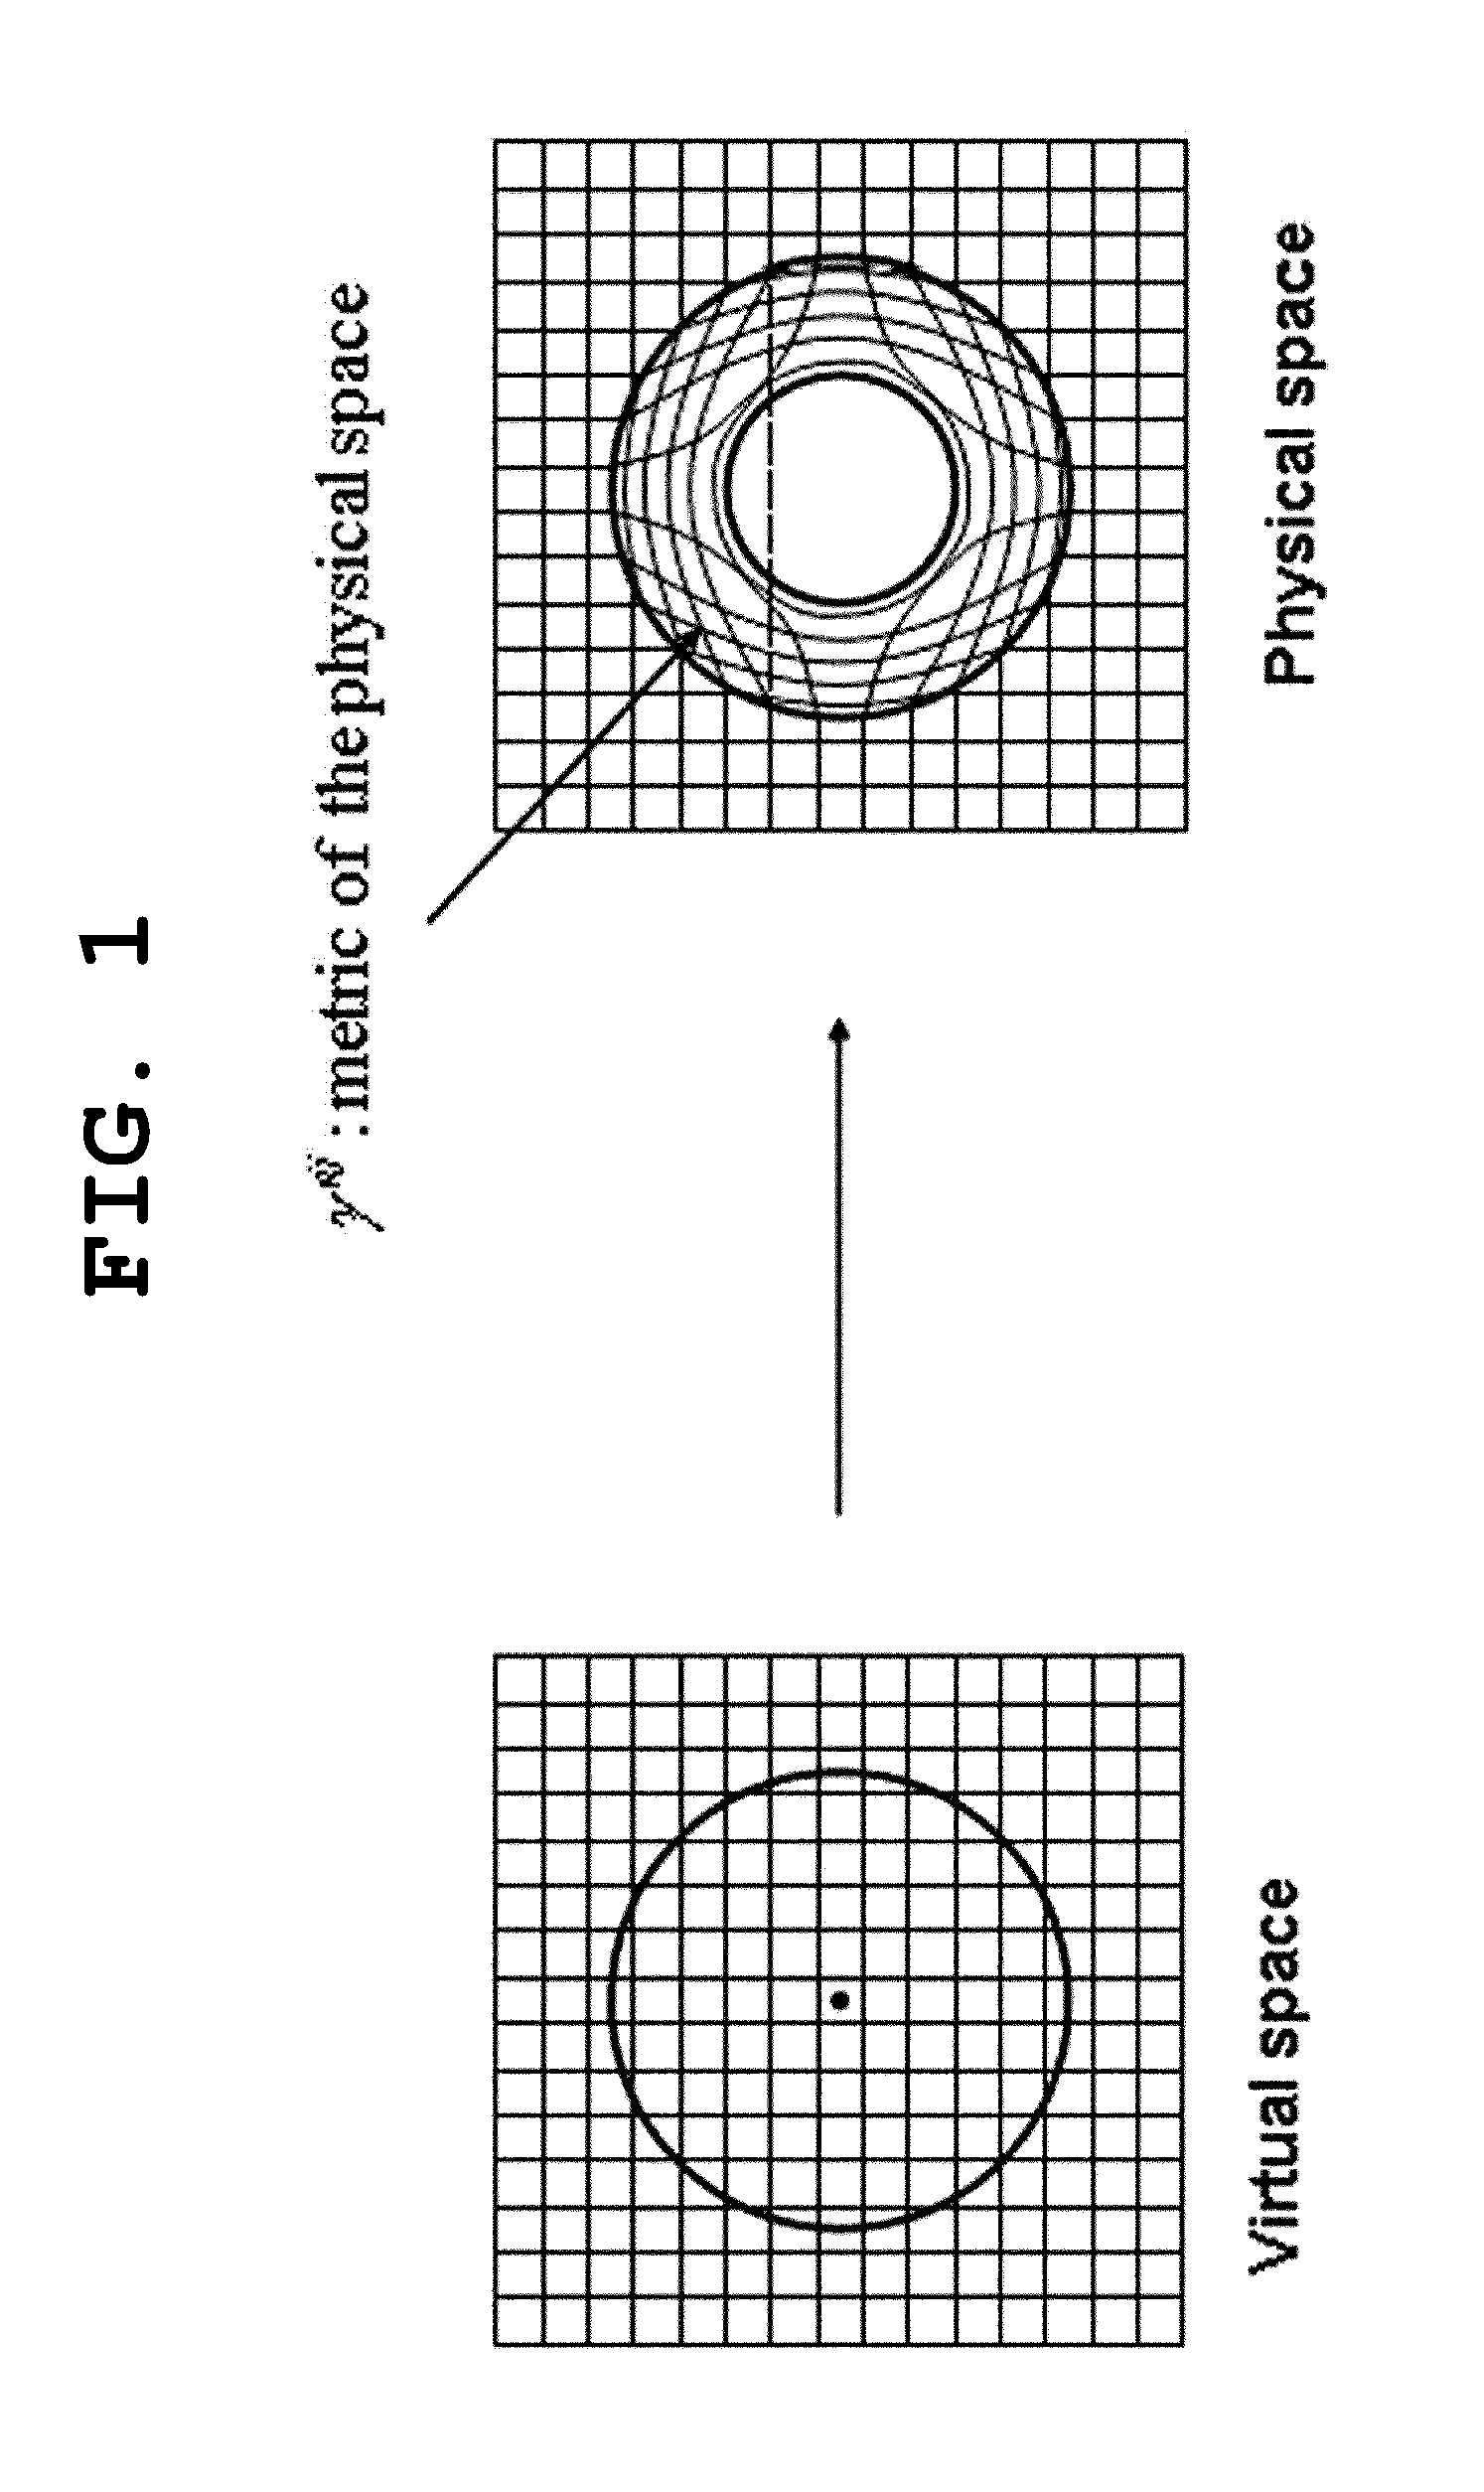 Apparatus and method for invisbility cloaking